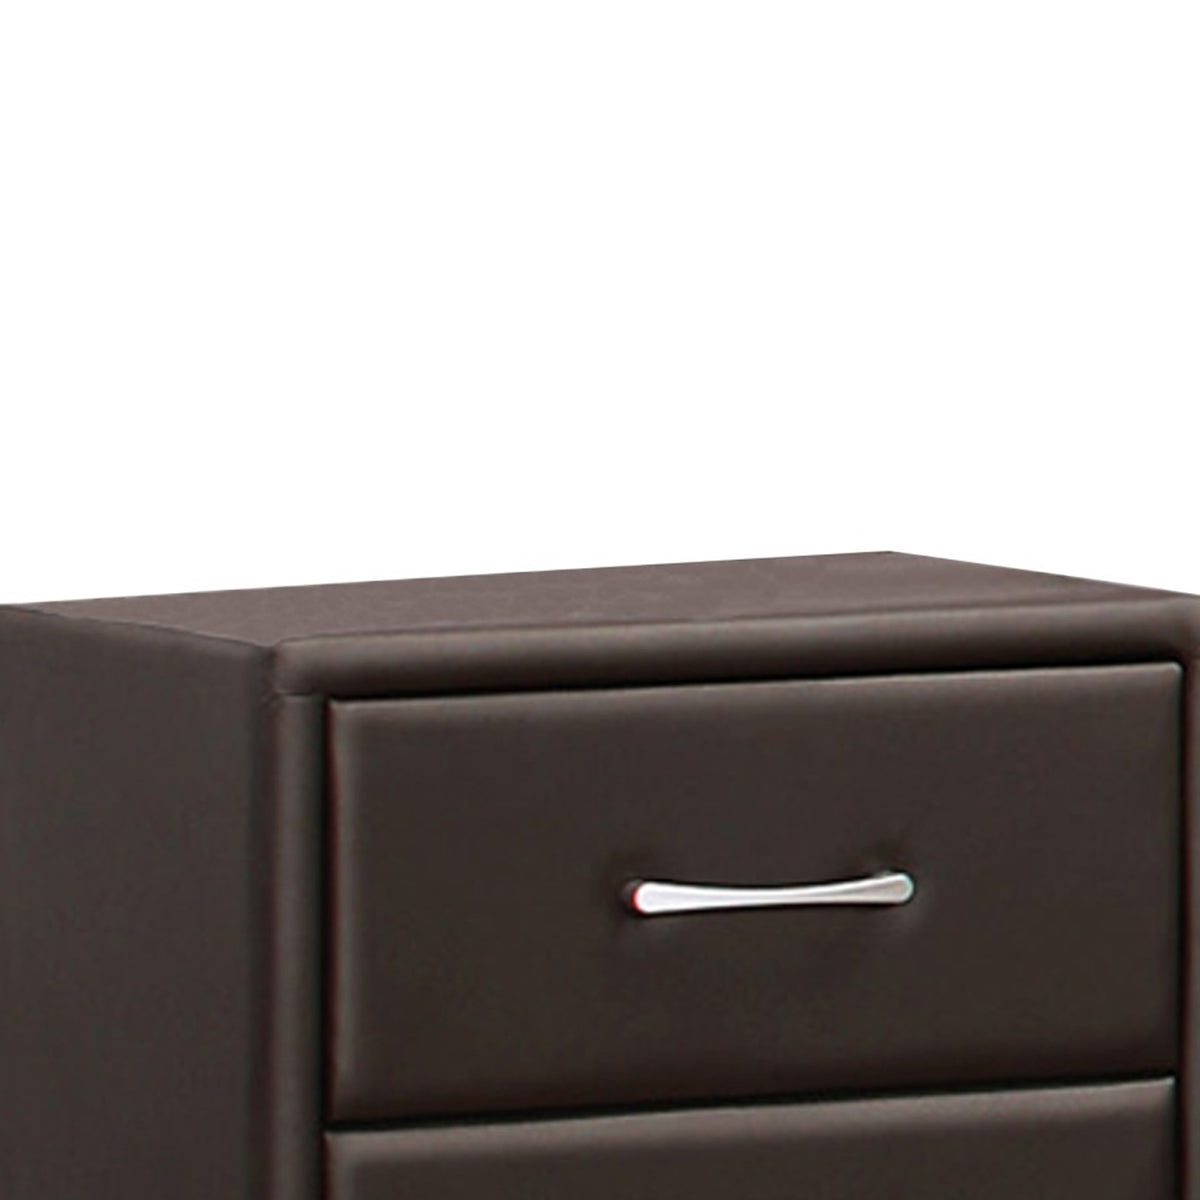 2 Drawer Night Stand In Wood And PVC, Black - BM179894